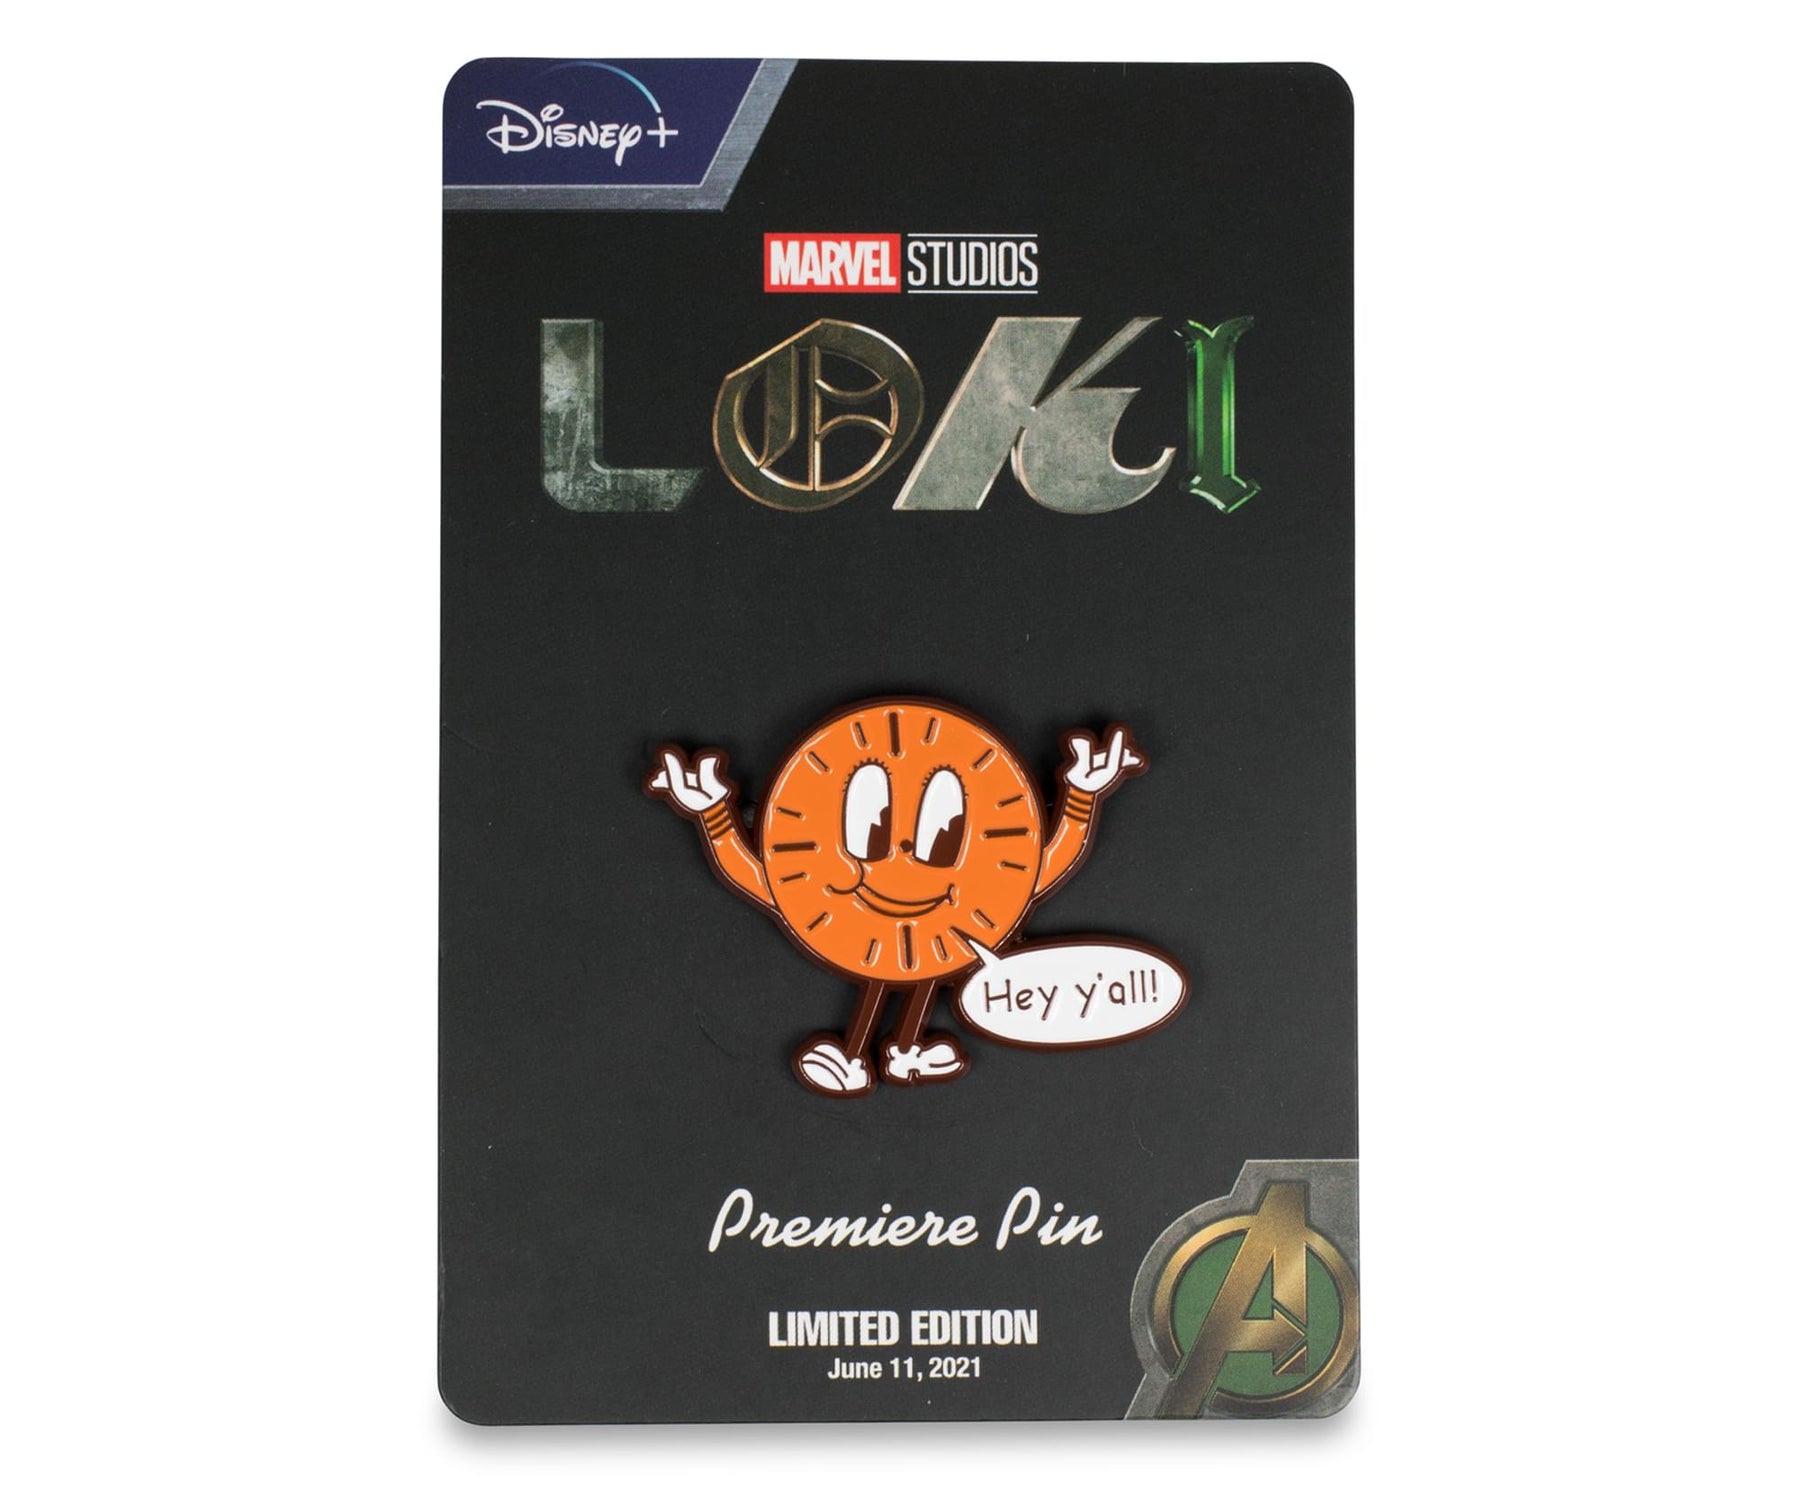 Marvel Loki Miss Minutes Limited Edition Premiere Pin | Toynk Exclusive